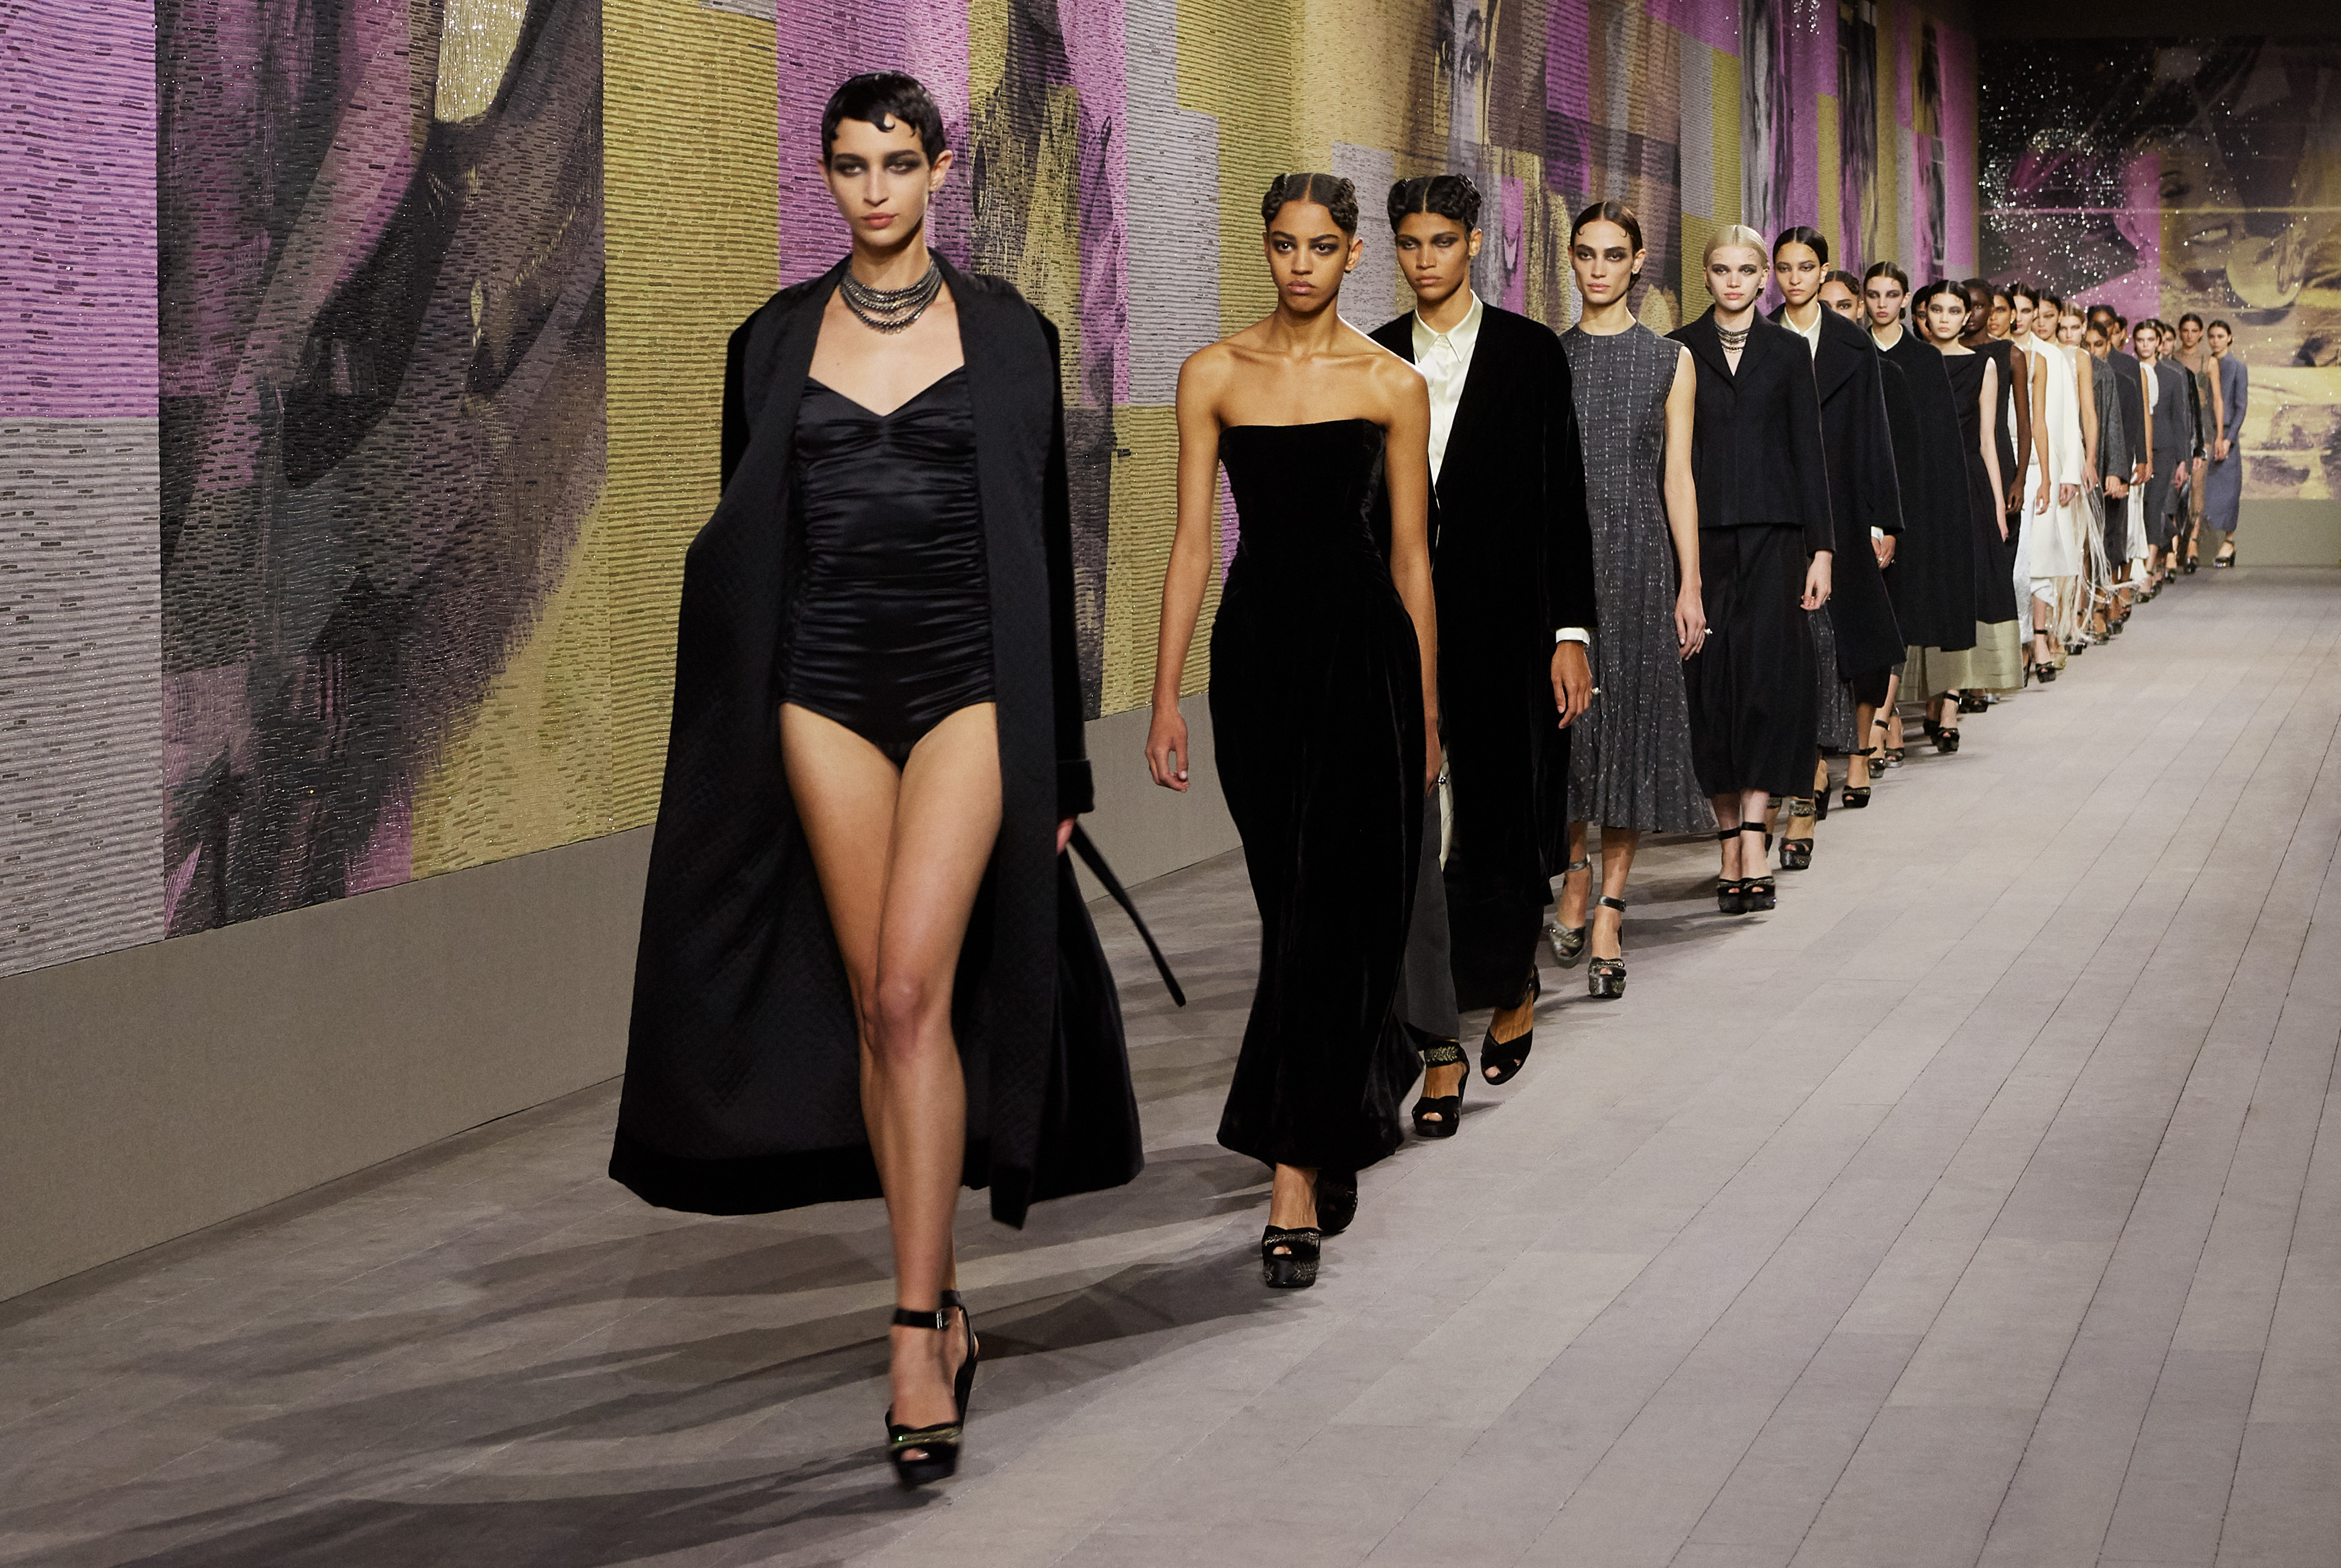 Fashion and Decor: First 10 Years for Christian Dior Fashion Show